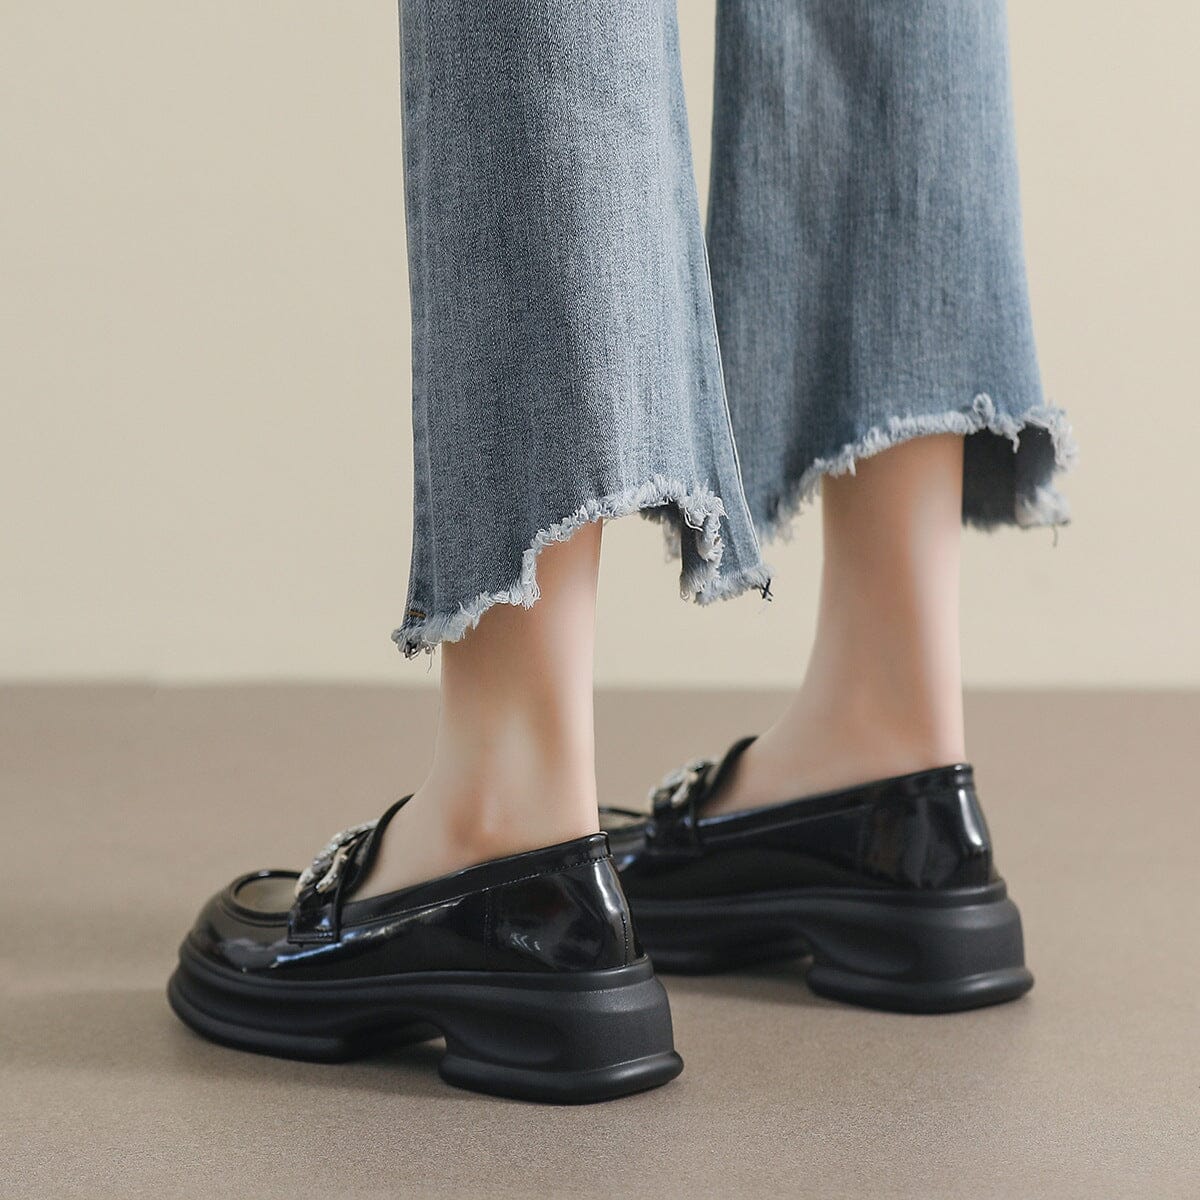 Spring Retro Glossy Leather Casual Loafers